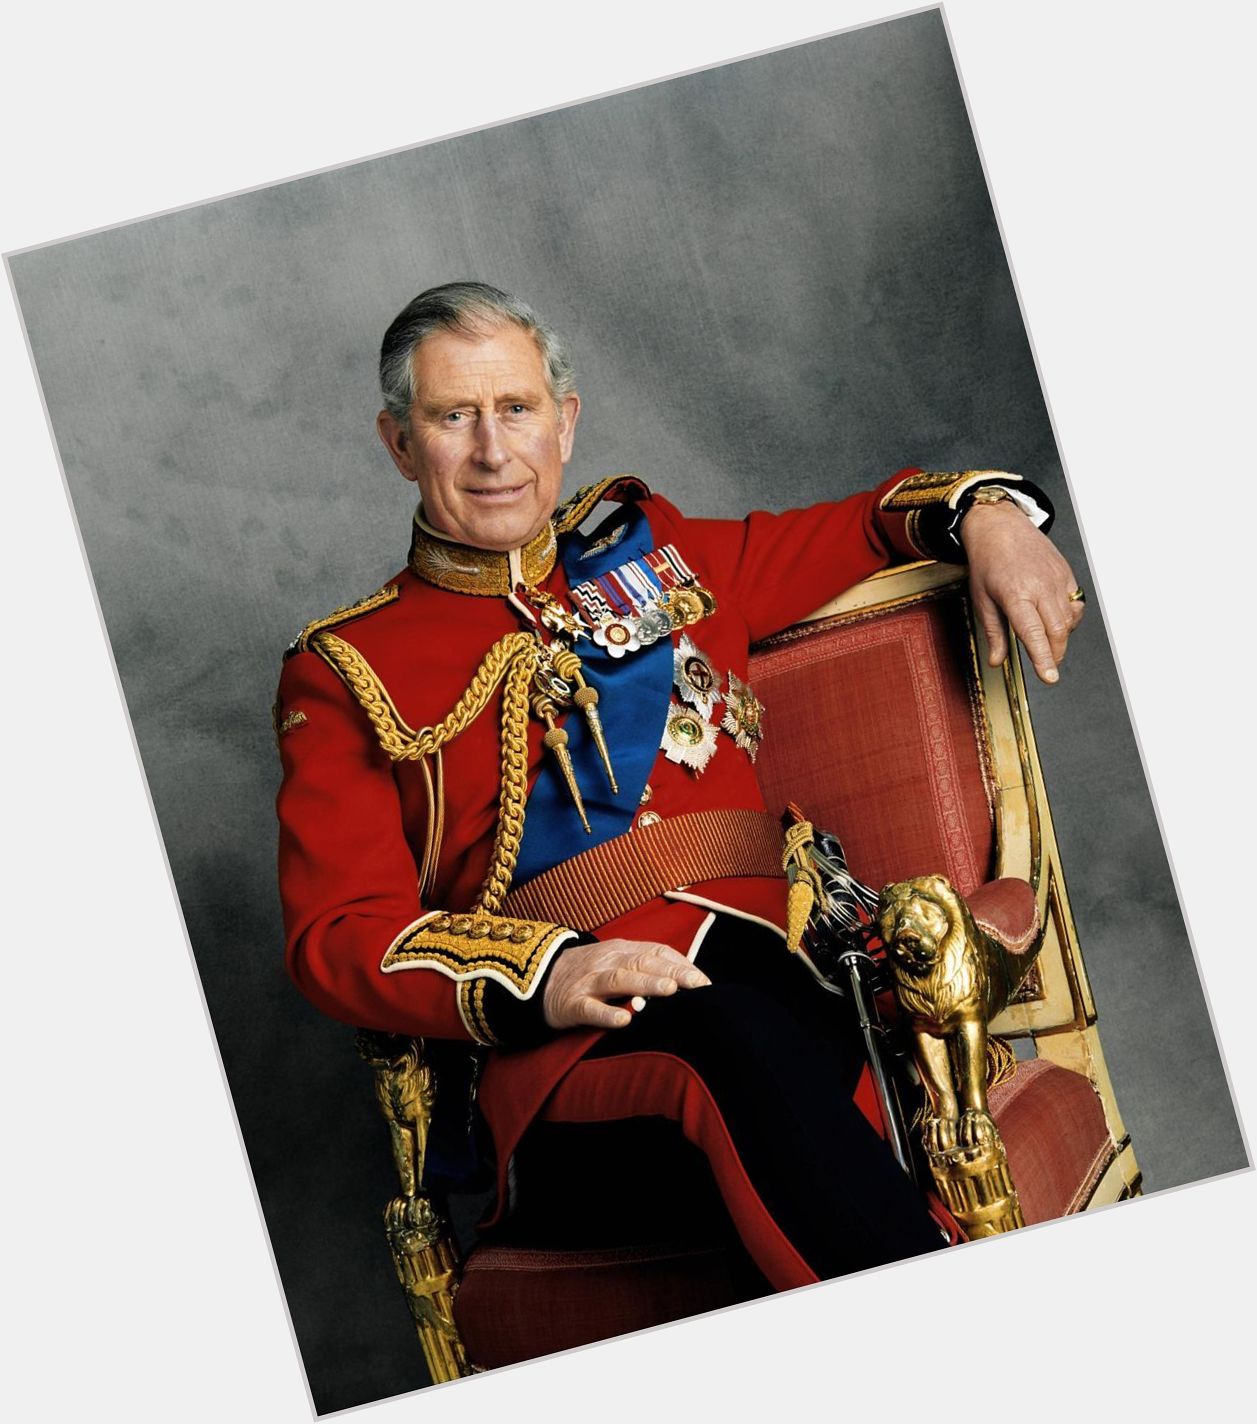 Happy birthday to Prince Charles A very happy 66th to HRH The Prince of Wales, our future King! 